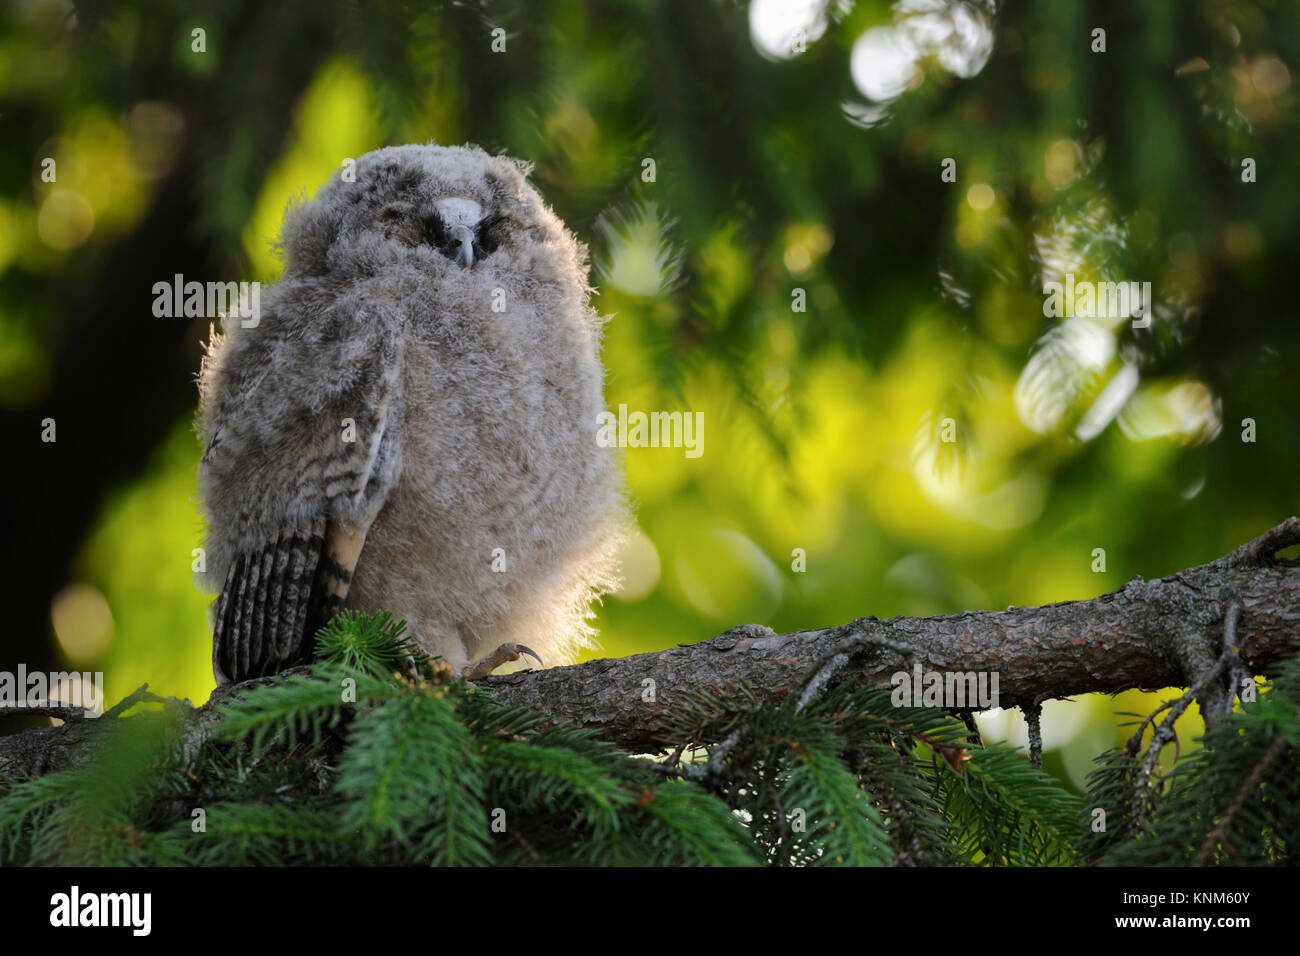 Long-eared Owl / Waldohreule ( Asio otus ), funny fledgling, young moulting chick, perched in a tree, resting, sleeping, looks funny, wildlife, Europe Stock Photo